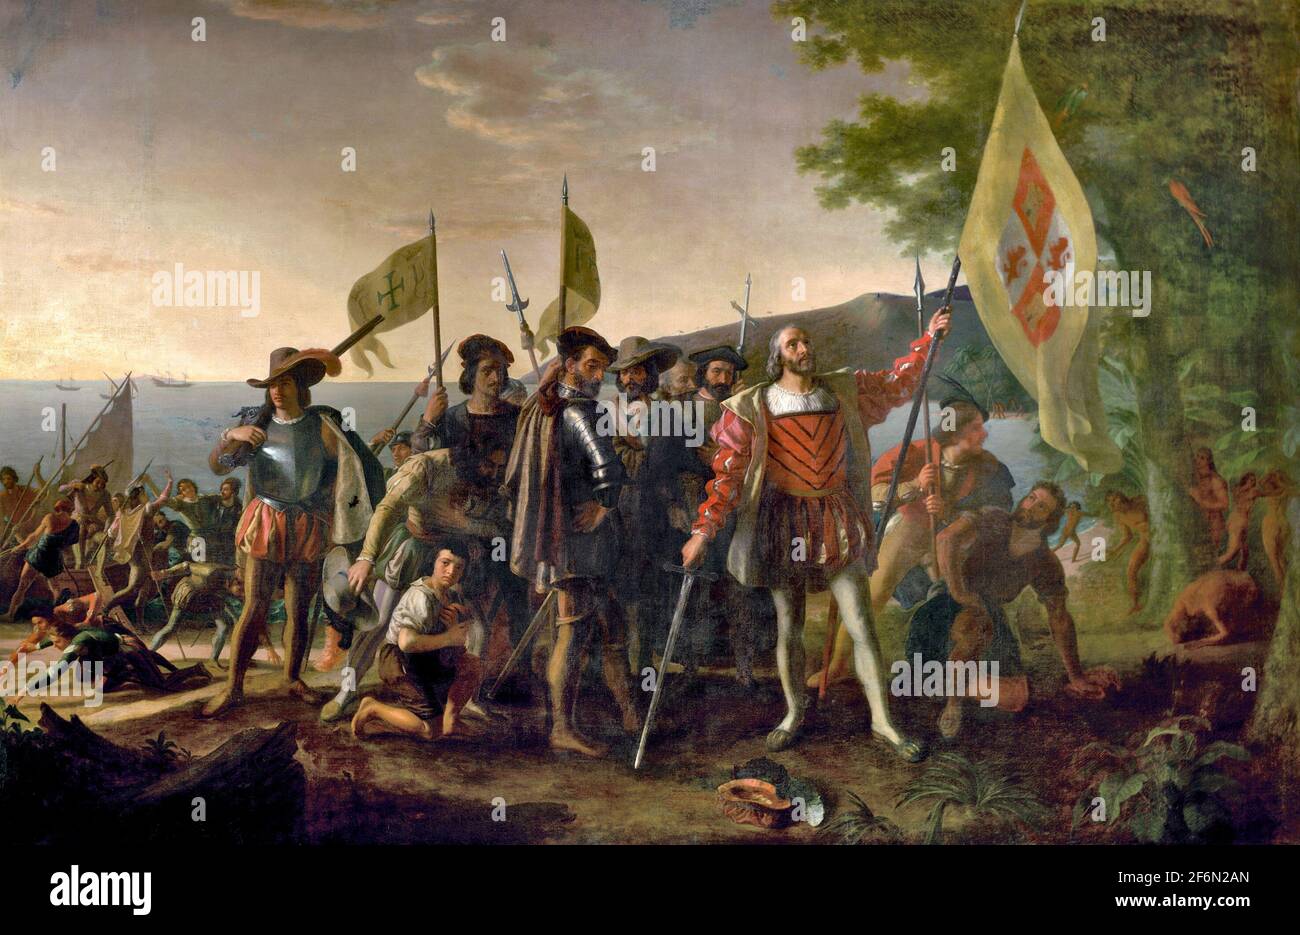 Landing of Columbus - Christopher Columbus is depicted landing in the West Indies, on an island that the natives called Guanahani and he named San Salvador, on October 12, 1492. He raises the royal banner, claiming the land for his Spanish patrons, and stands bareheaded, with his hat at his feet, in honor of the sacredness of the event. The captains of the Niña and Pinta follow, carrying the banner of Ferdinand and Isabella. The crew displays a range of emotions, some searching for gold in the sand. Natives watch from behind a tree - John Vanderlyn, 1847 Stock Photo